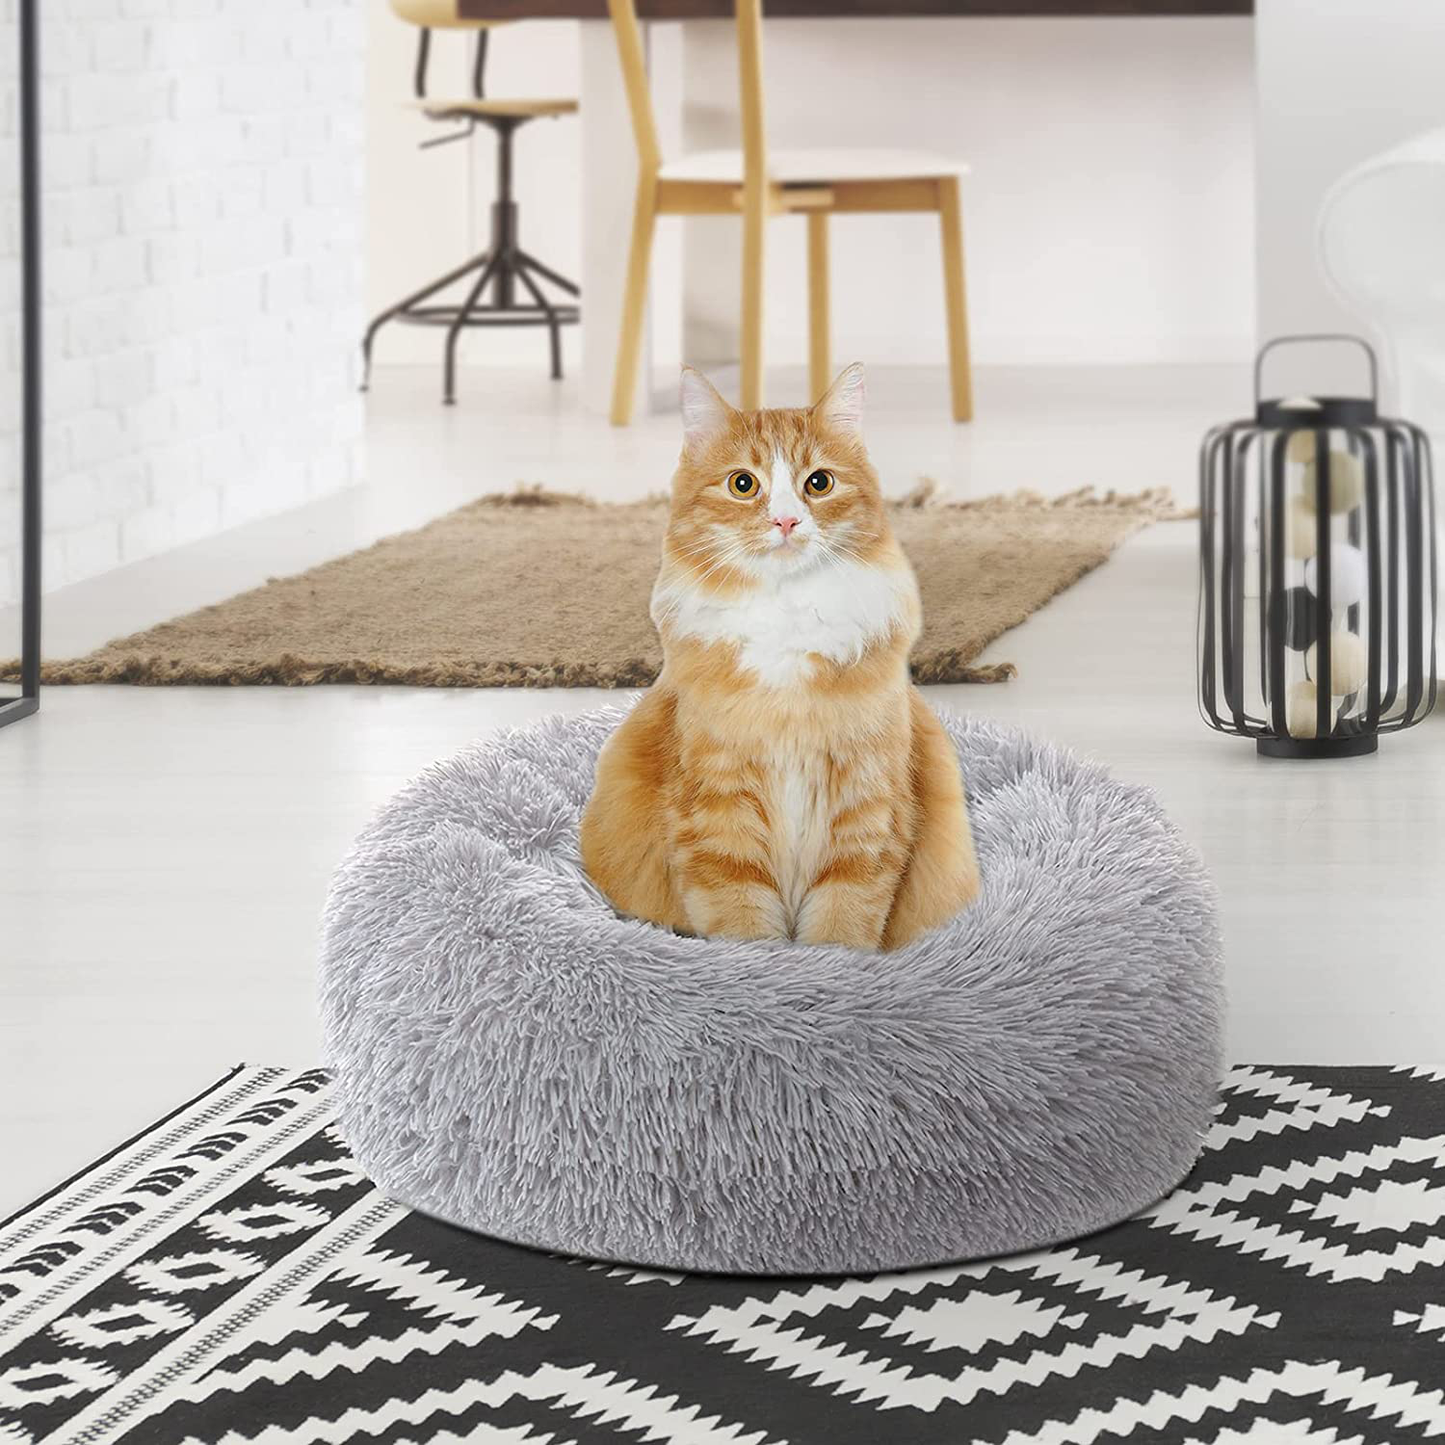 Dancewhale Cat Bed Donut Cuddler, Flurry Warming round Plush Cushion Mat for Small Medium Large Dogs and Cats, Indoor Sleeping Bed Animals & Pet Supplies > Pet Supplies > Cat Supplies > Cat Beds DanceWhale   